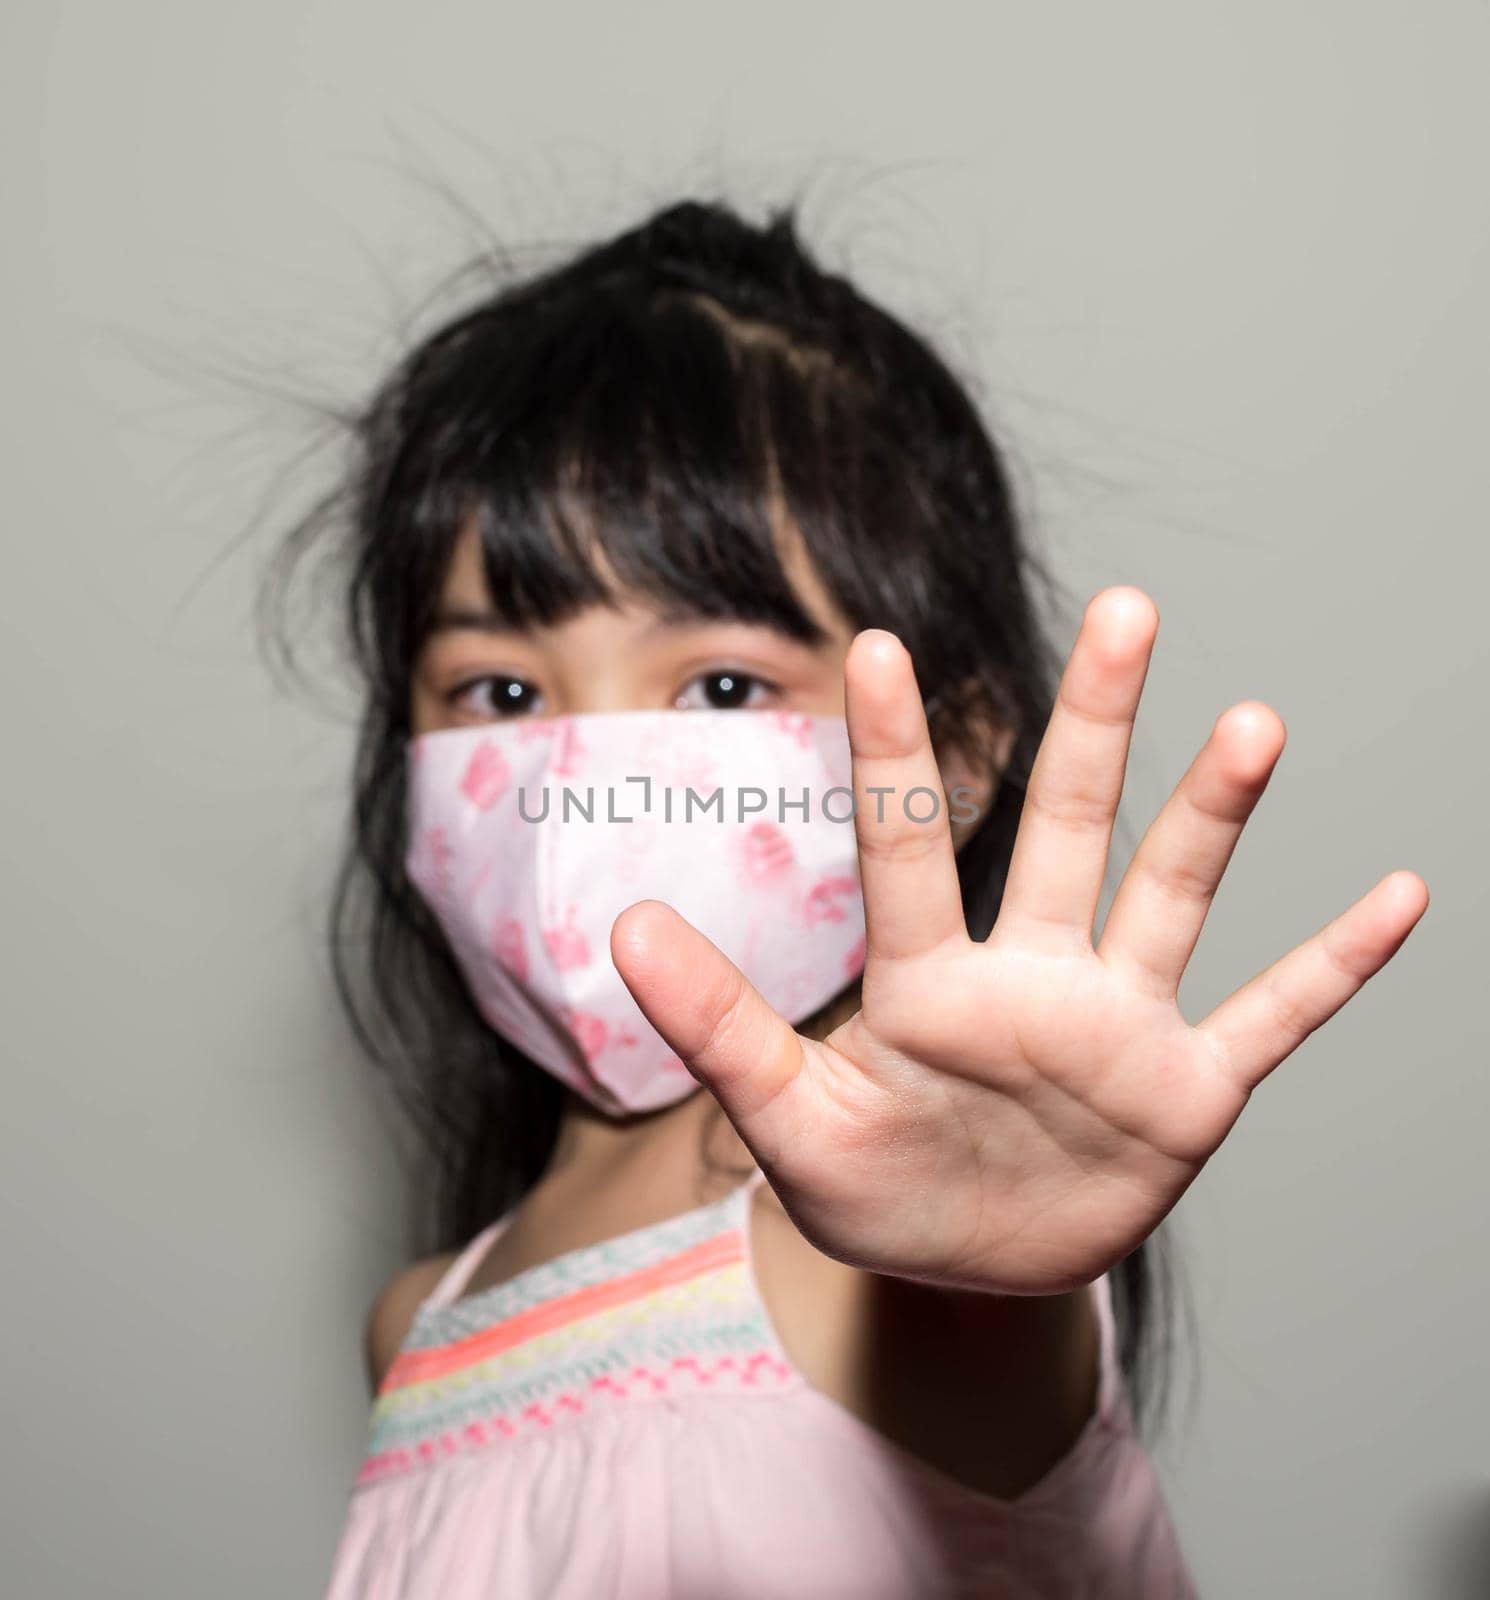 Kids hand to say no against corona virus infection. Blurry image of a female kid showing her hand to symbolize against the spread of corona virus